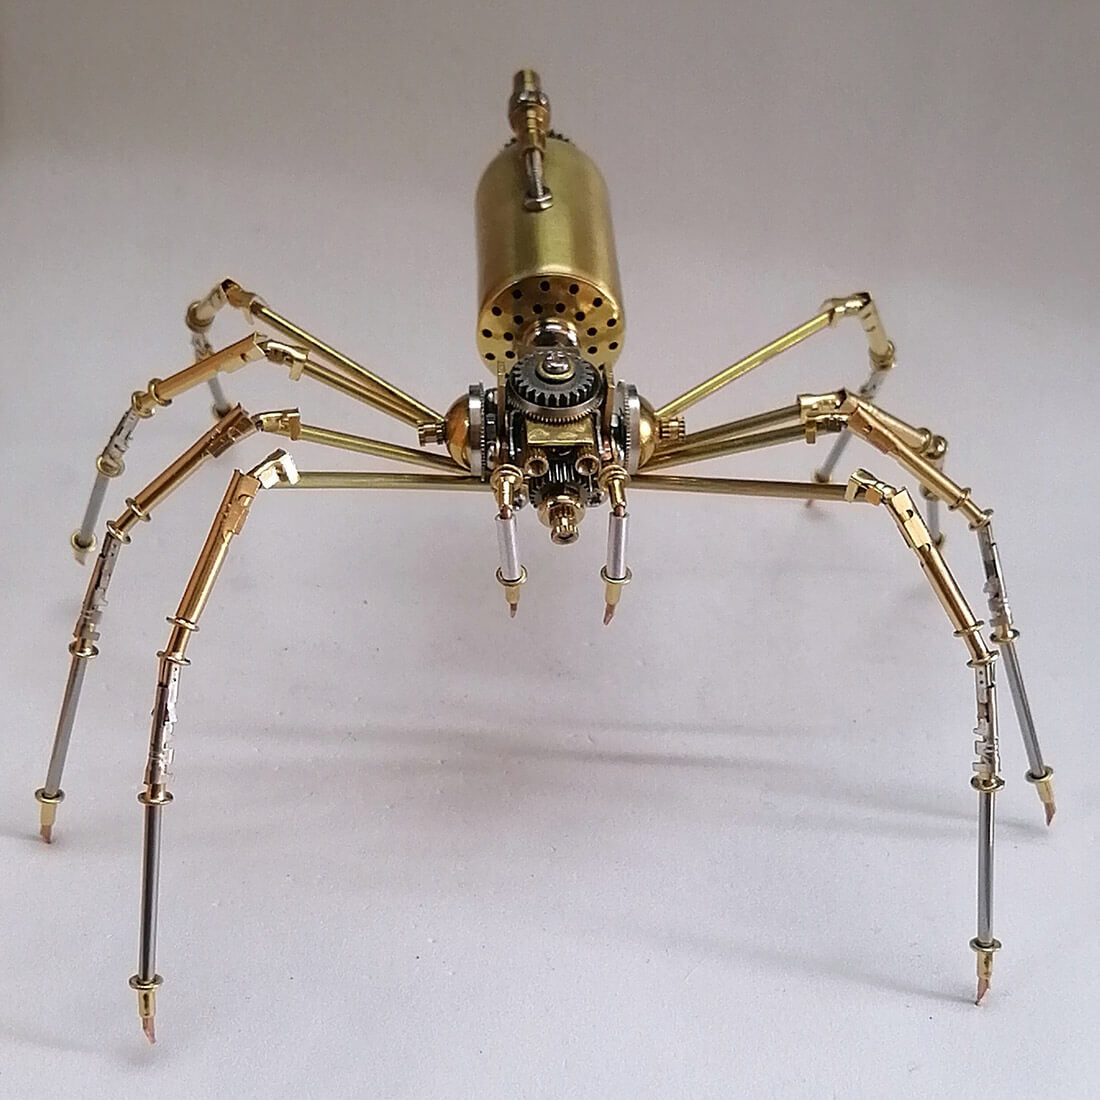 3D Mini Long-legged Spider Model Steampunk DIY Metal Puzzle Assembly